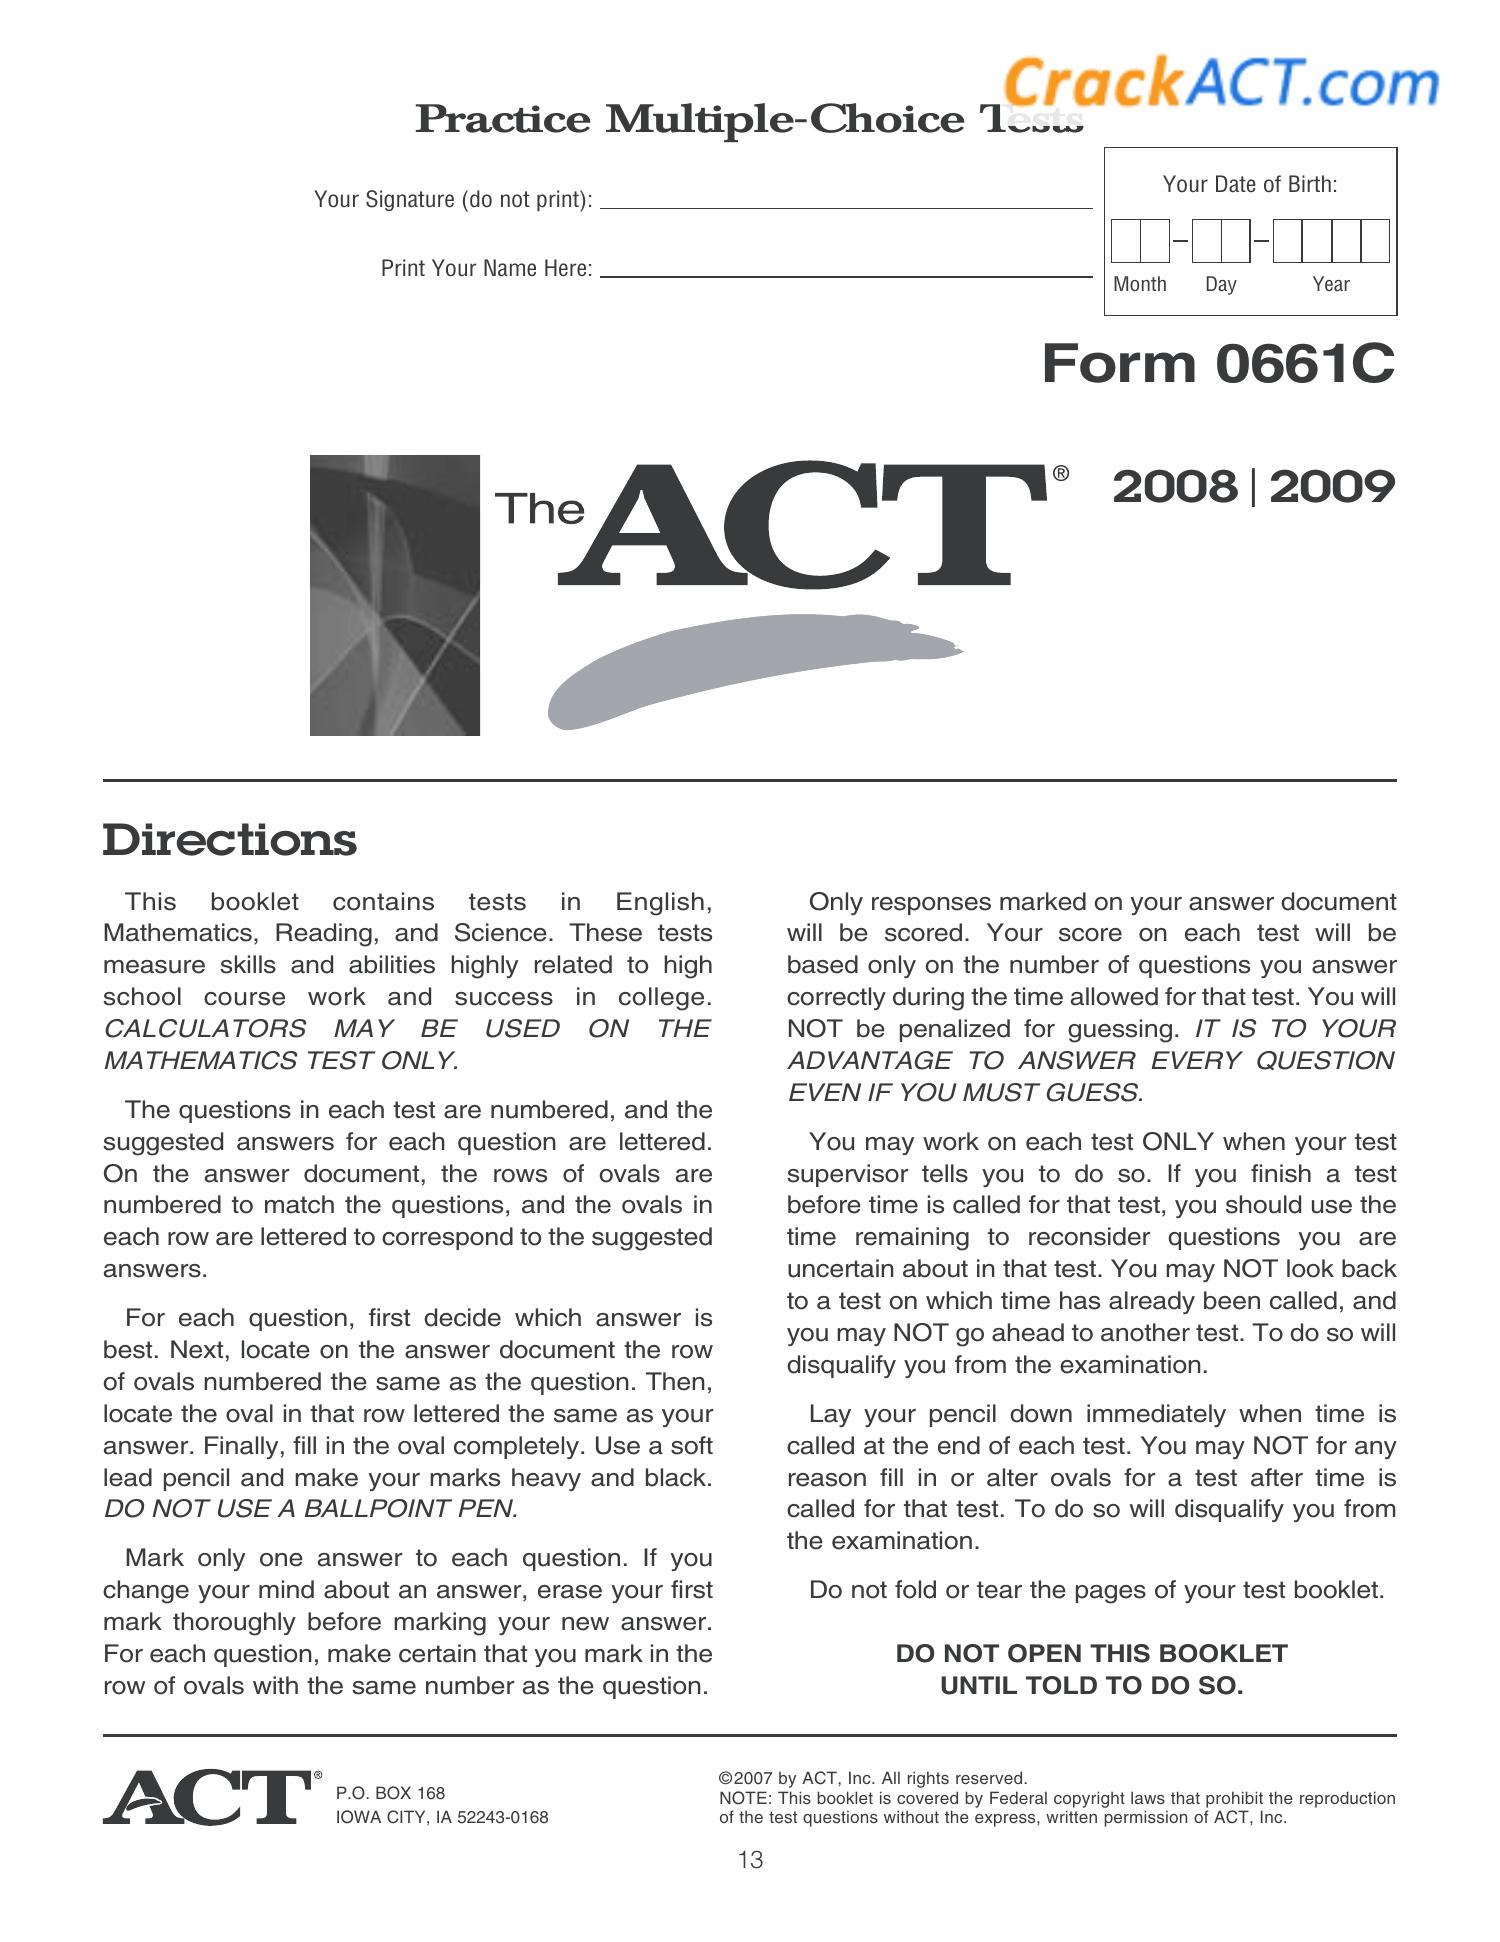 20089 ACT Form 0661C (also January 2006 ACT) McElroy Tutoring.pdf